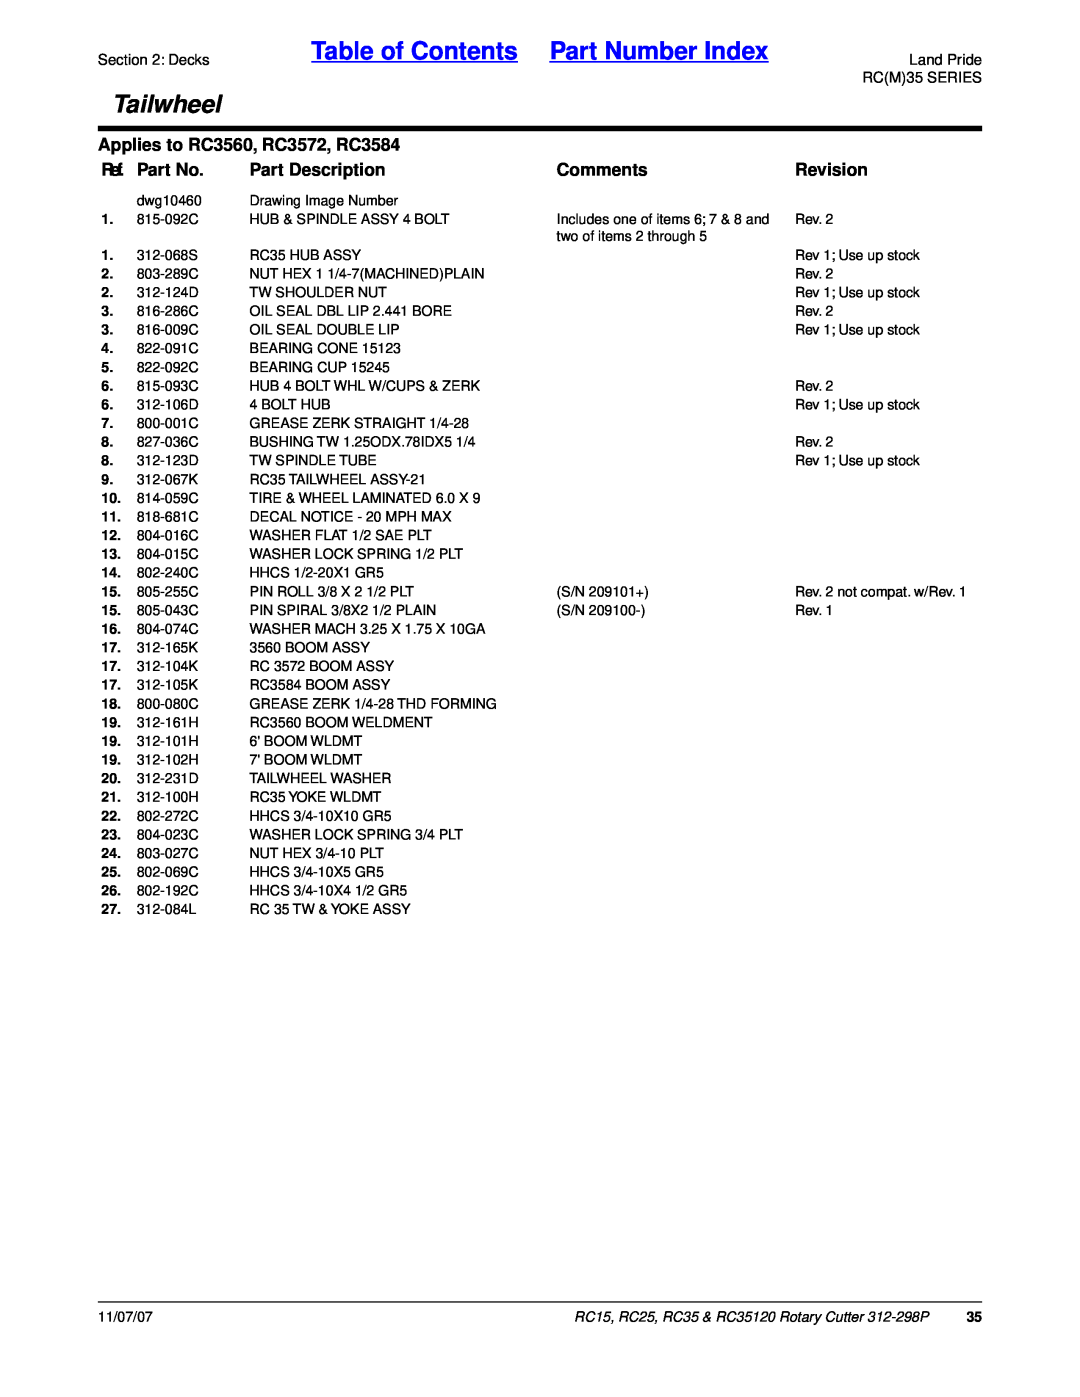 Land Pride RC15 Table of Contents Part Number Index, Tailwheel, Applies to RC3560, RC3572, RC3584, Ref. Part No, Comments 